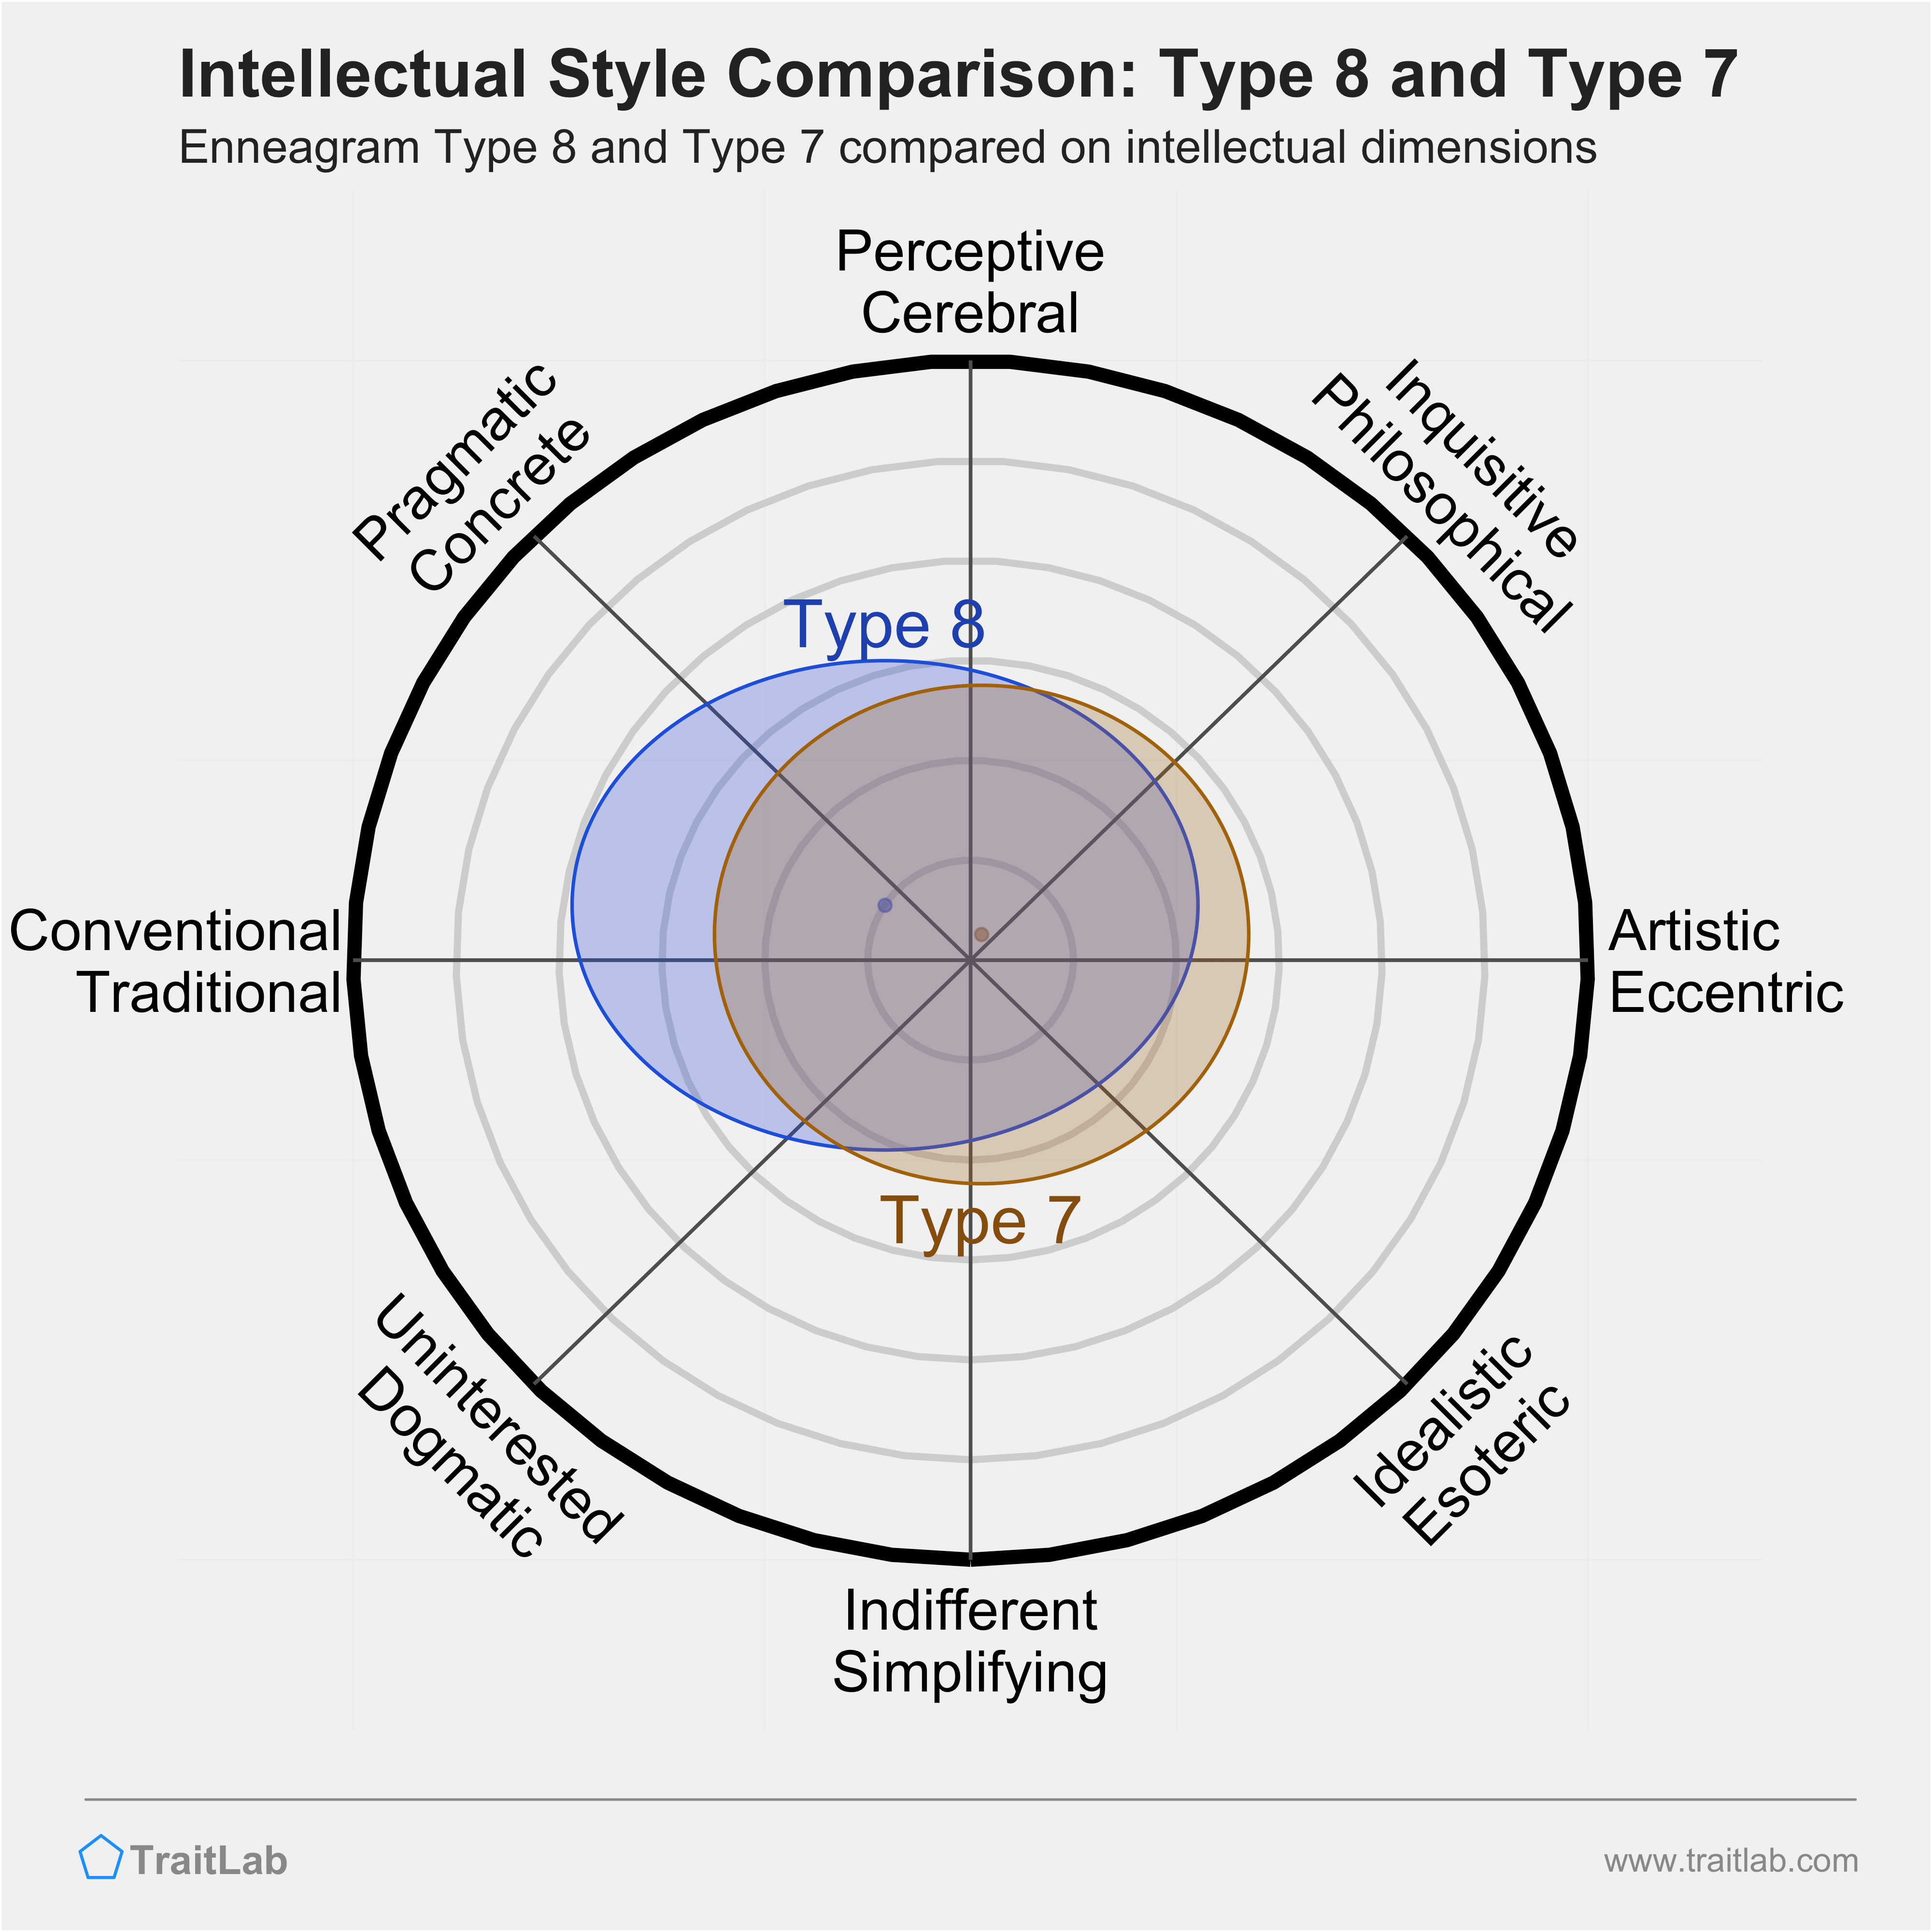 Type 8 and Type 7 comparison across intellectual dimensions